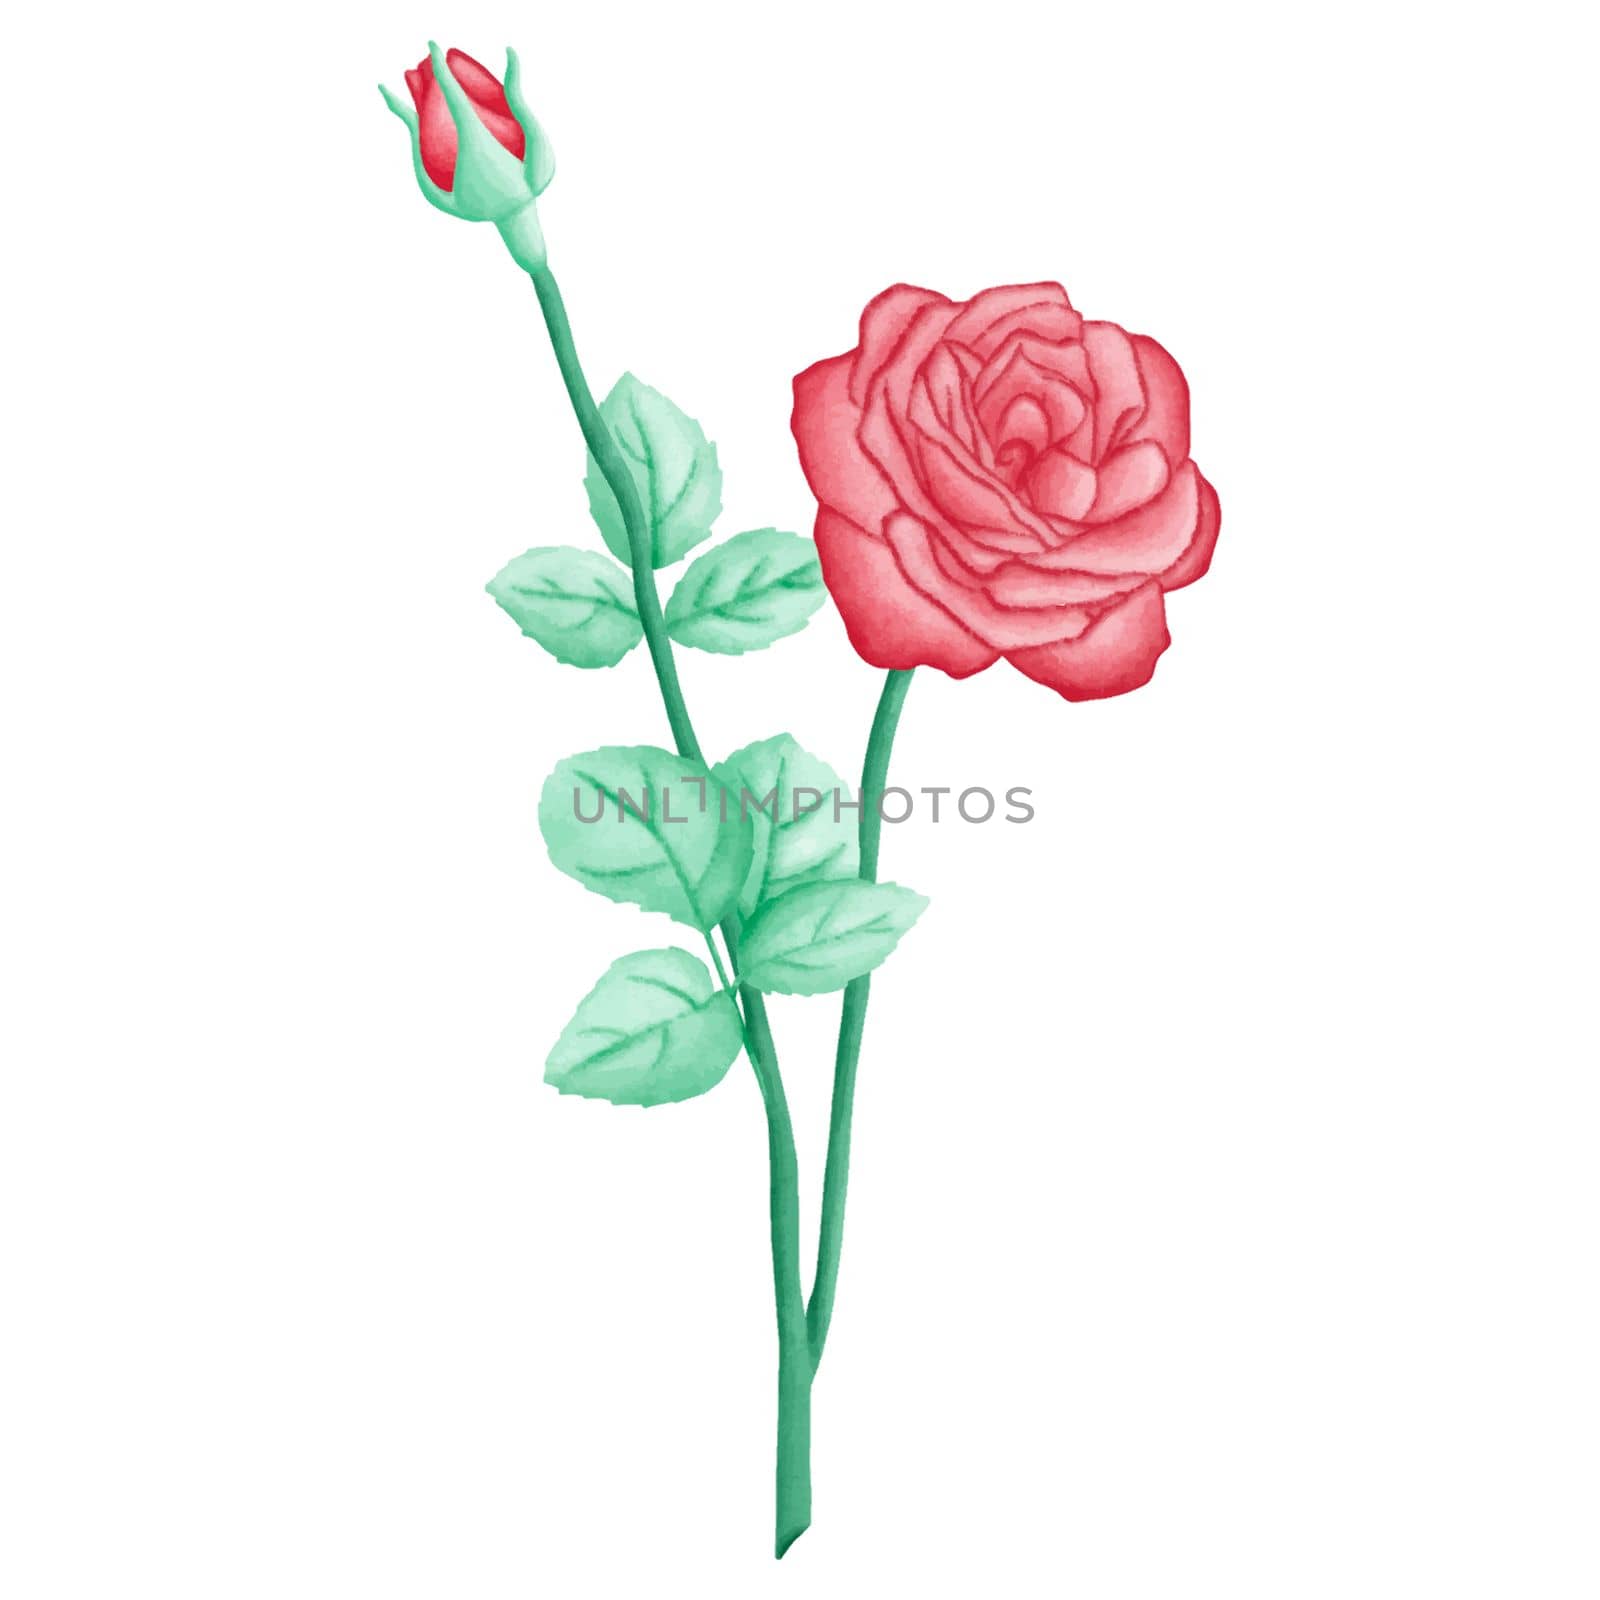 Red Roses Flowers Romantic Watercolor Clipart PNG. Paris In Love collection with lovely love roses flowers for romantic design element, love art, wedding watercolor illustration.